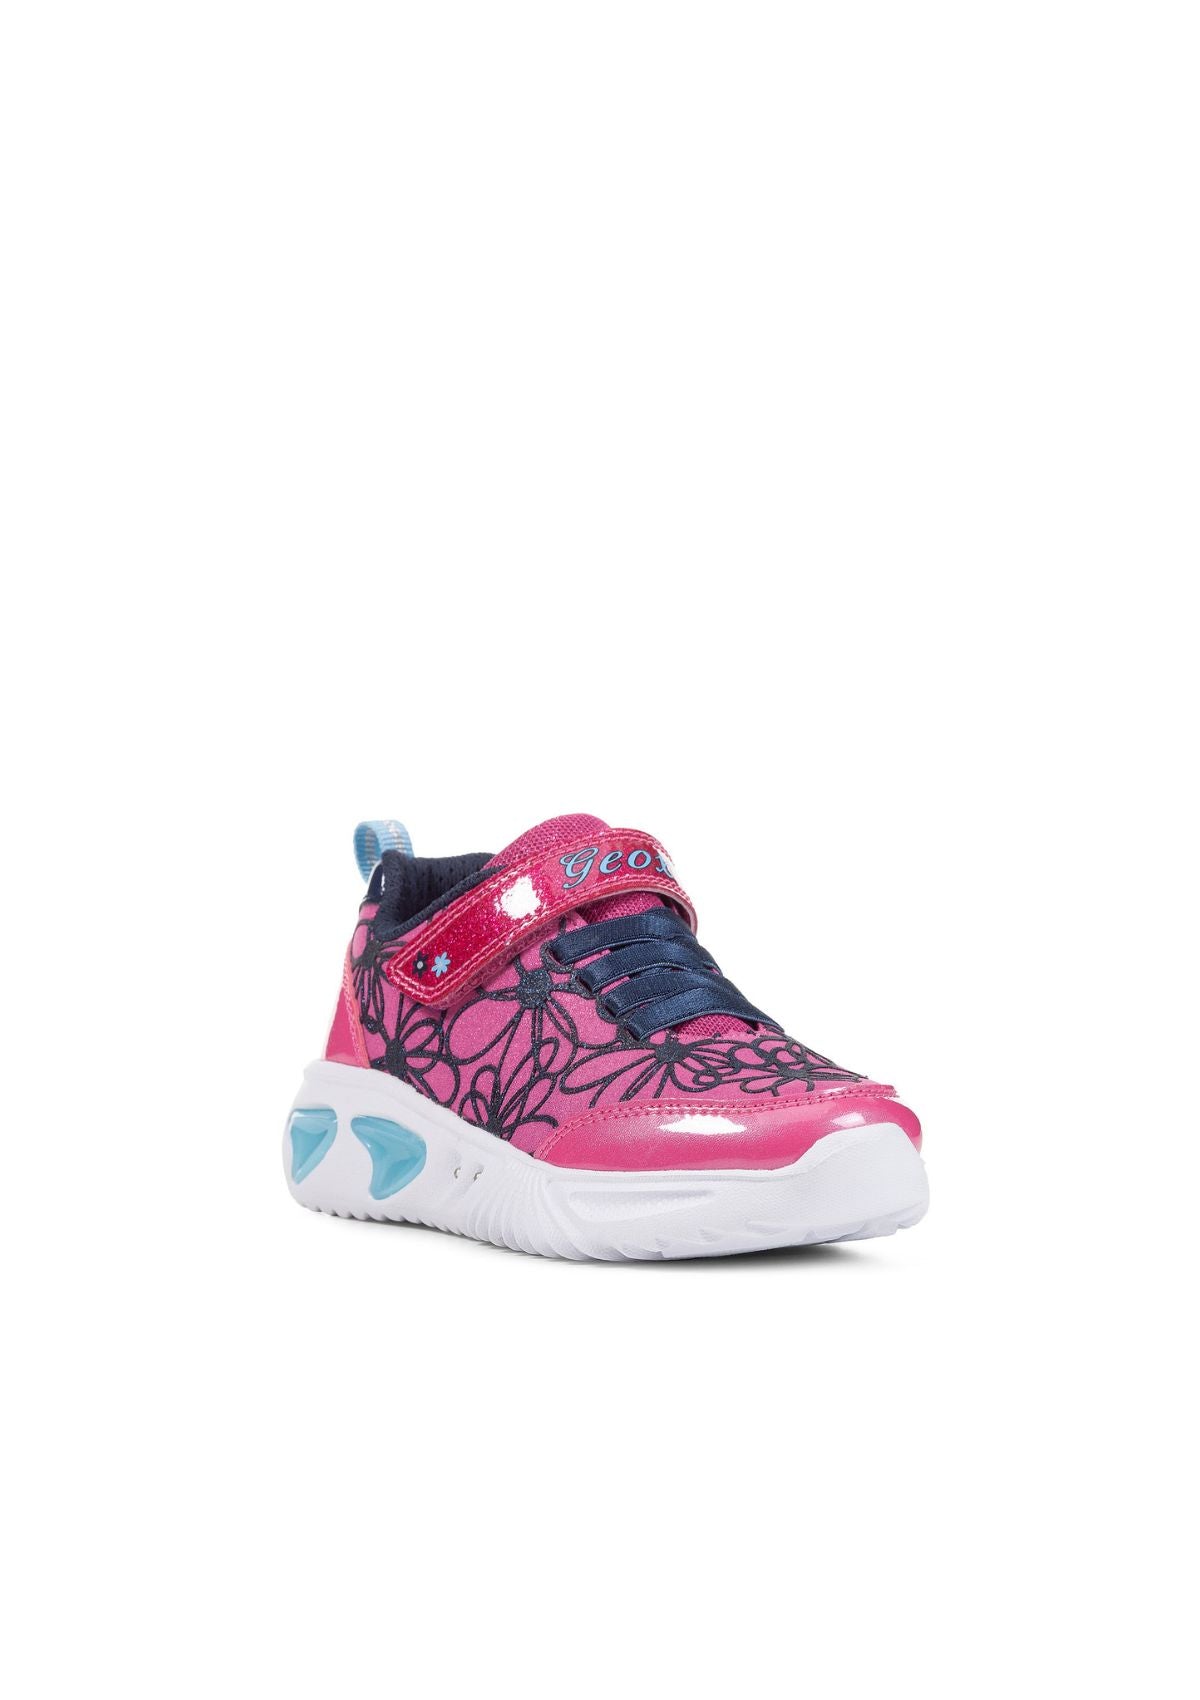 Geox Junior Girls ASSISTER Fuchsia Navy side front